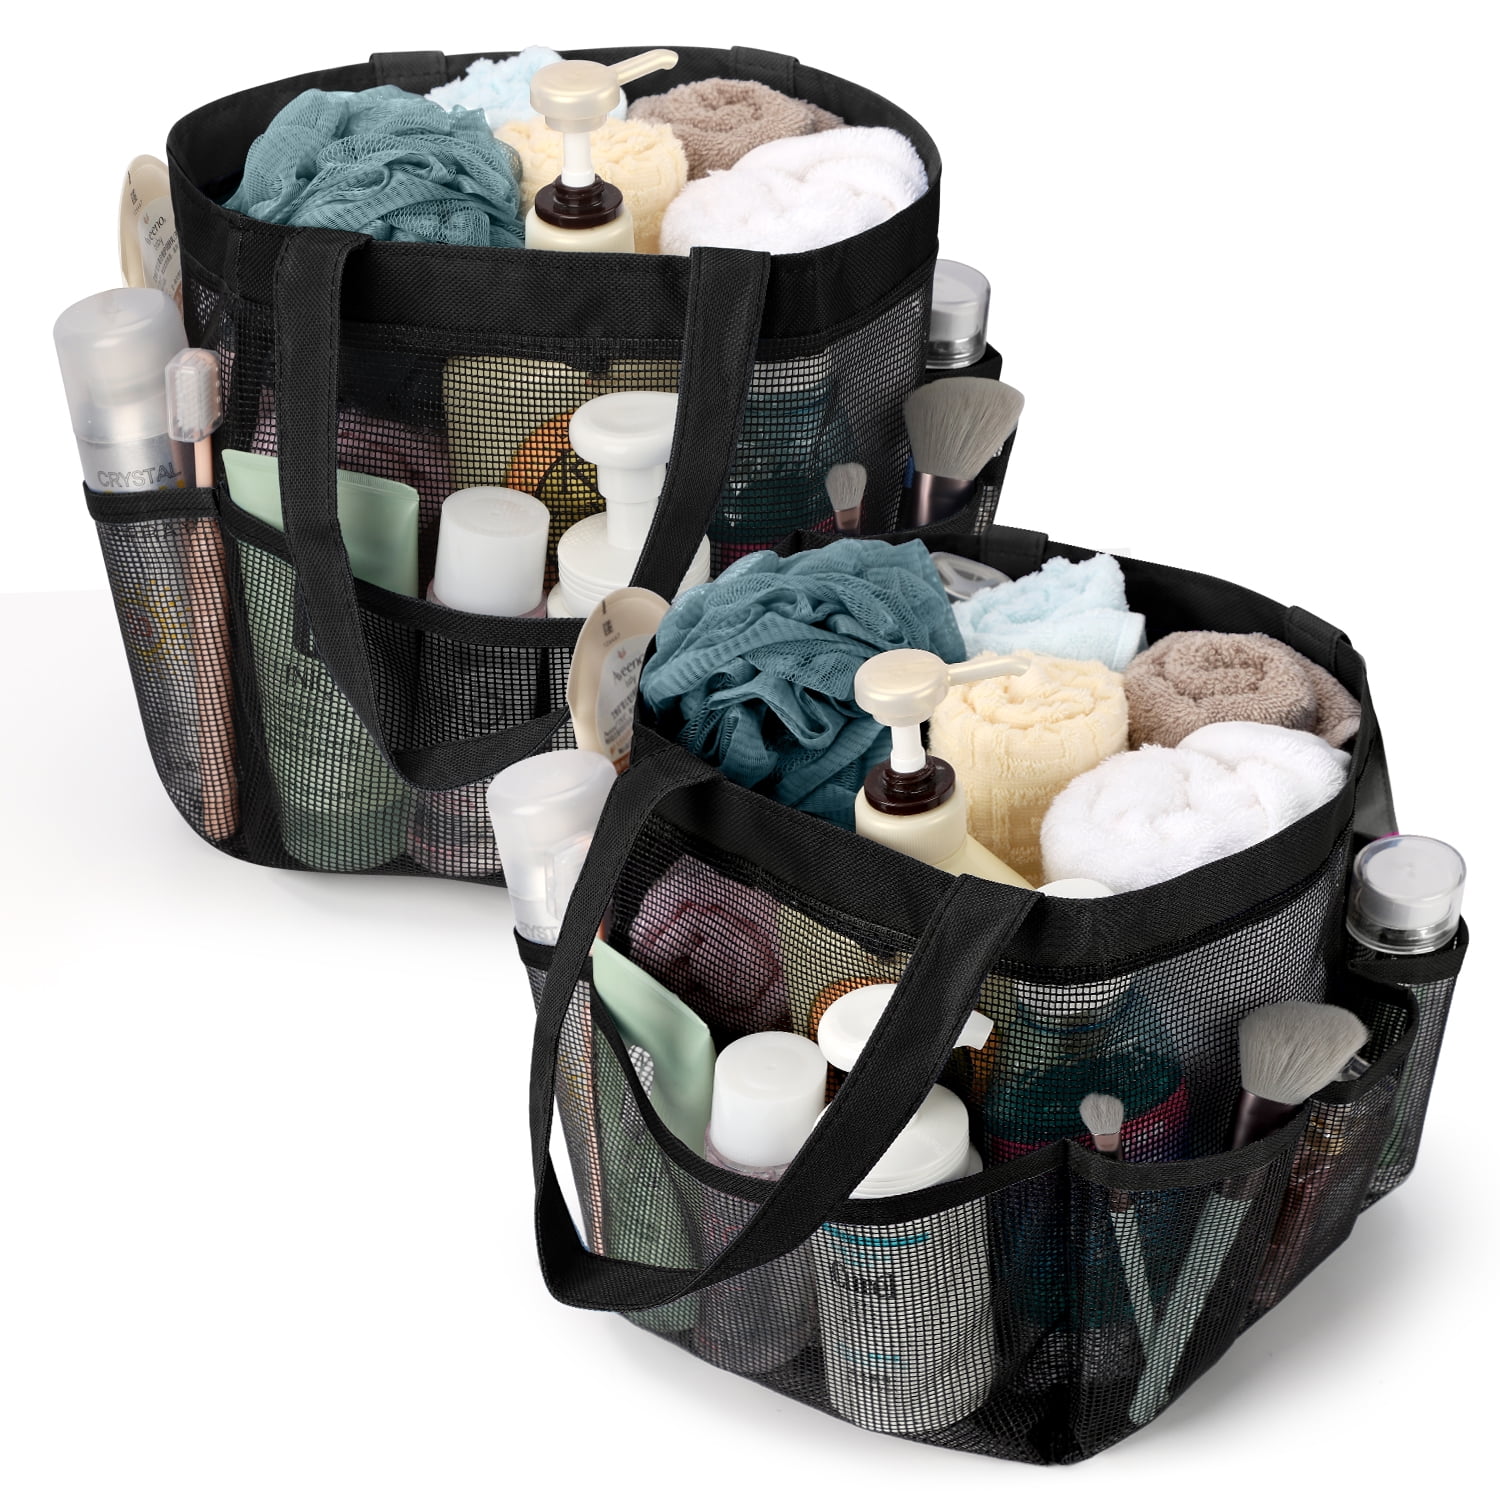  Epesl Shower Caddy Portable, College Dorm Room Essentials for  Girls, Bathroom Tote Storage Bag with Hook for Gym, Travel, Camping,  Hanging Organizer Shower Toiletry Basket - Grey : Home & Kitchen